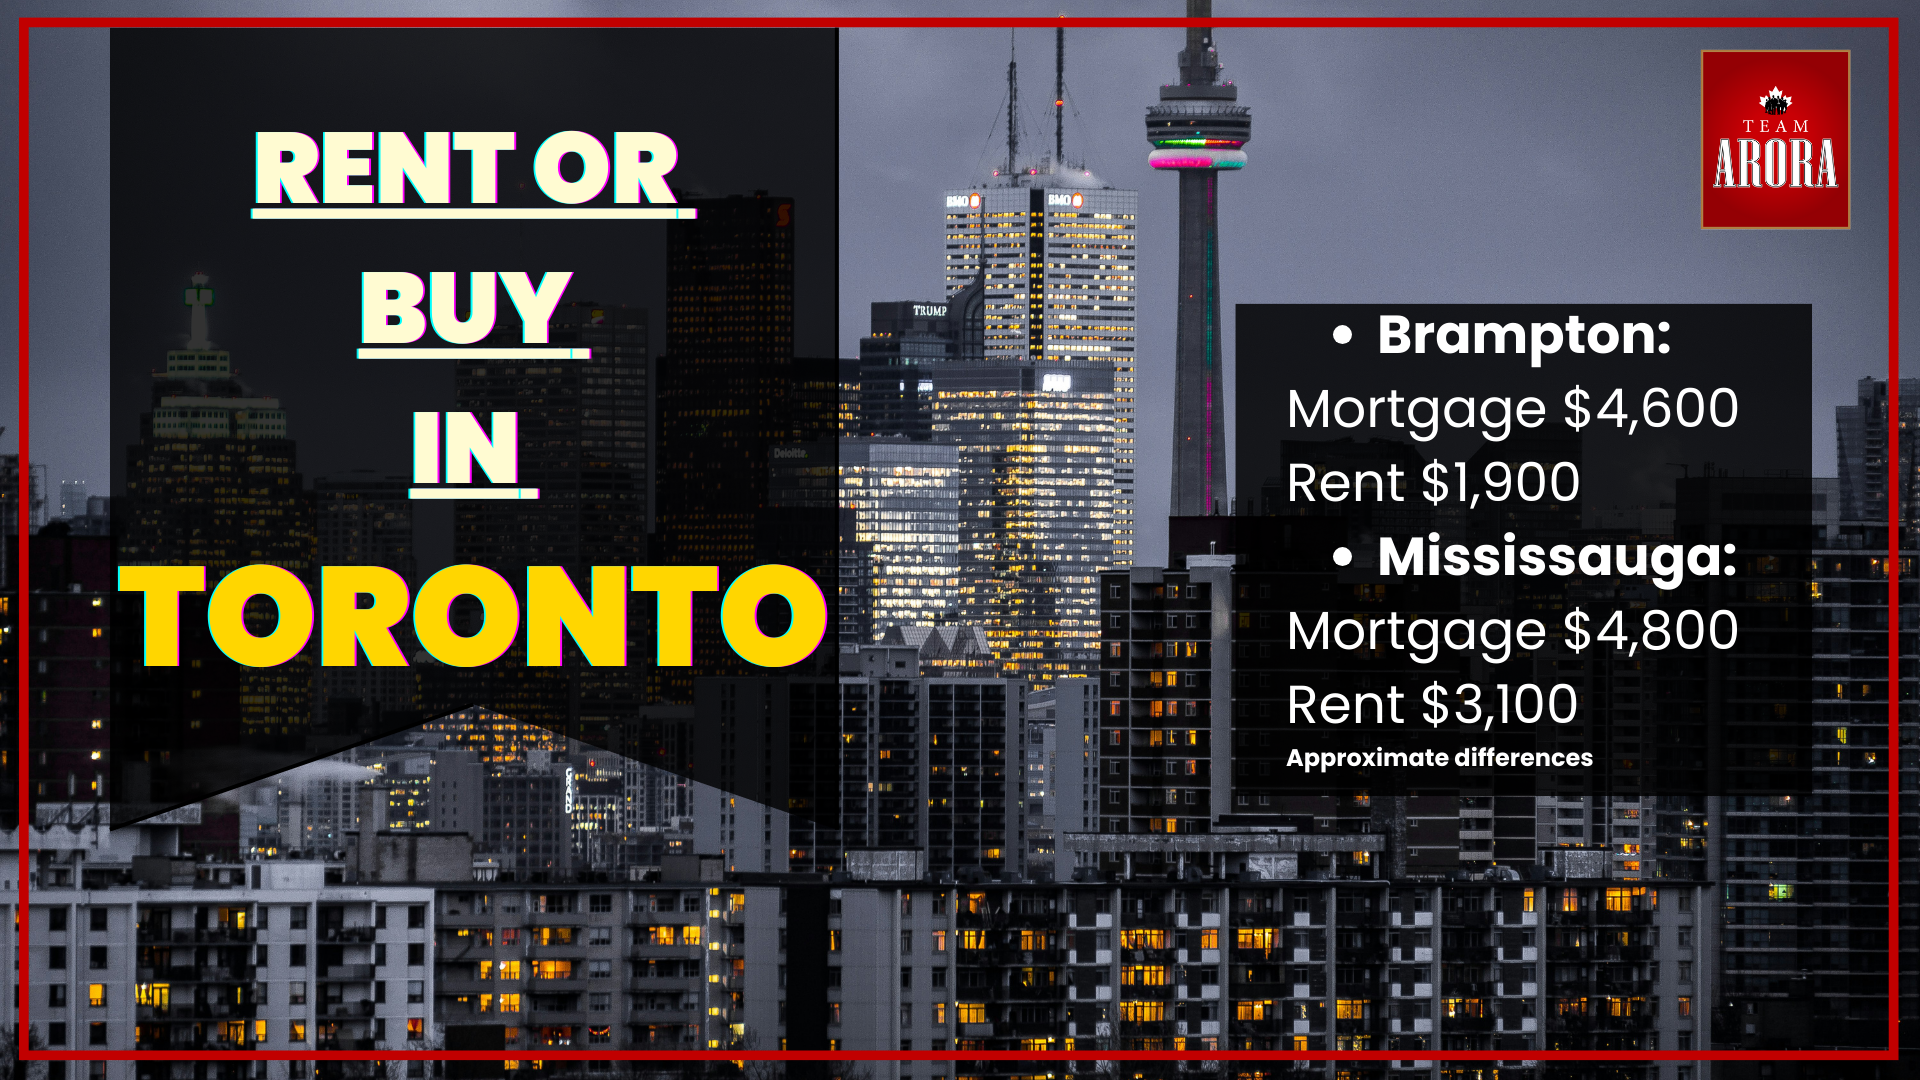 Rent or Buy in Toronto: Which is More Affordable?